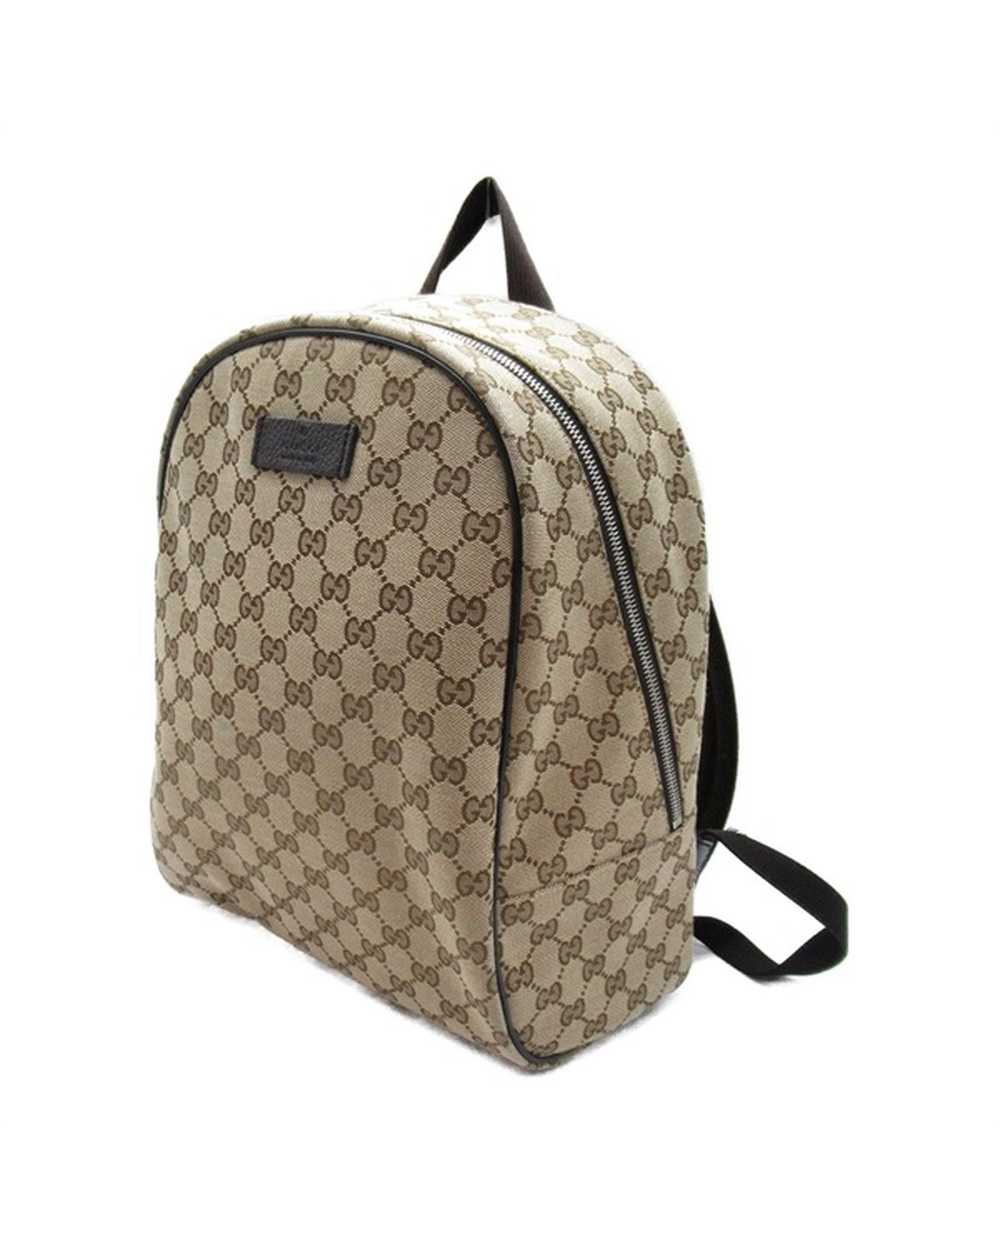 Gucci Canvas Backpack in Brown with GG Pattern - … - image 3